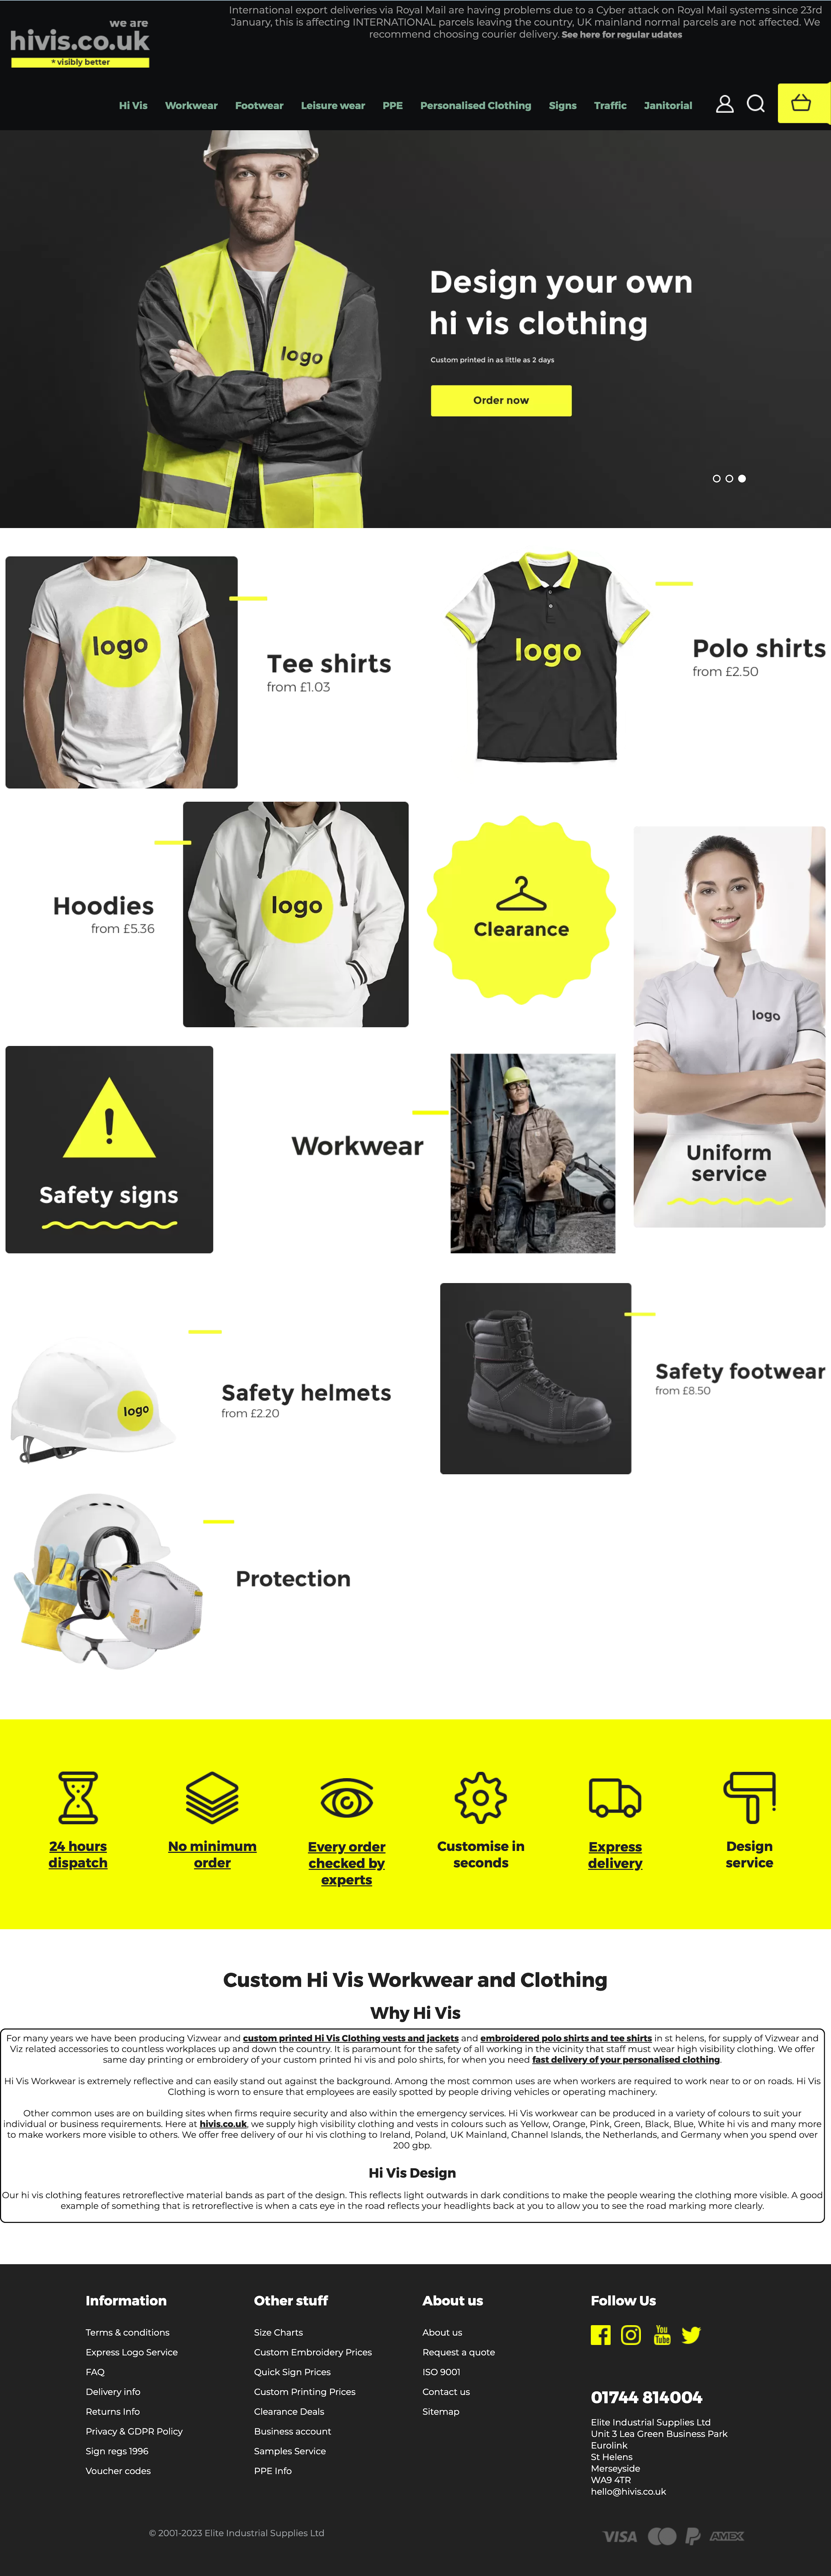 hivis-home-page